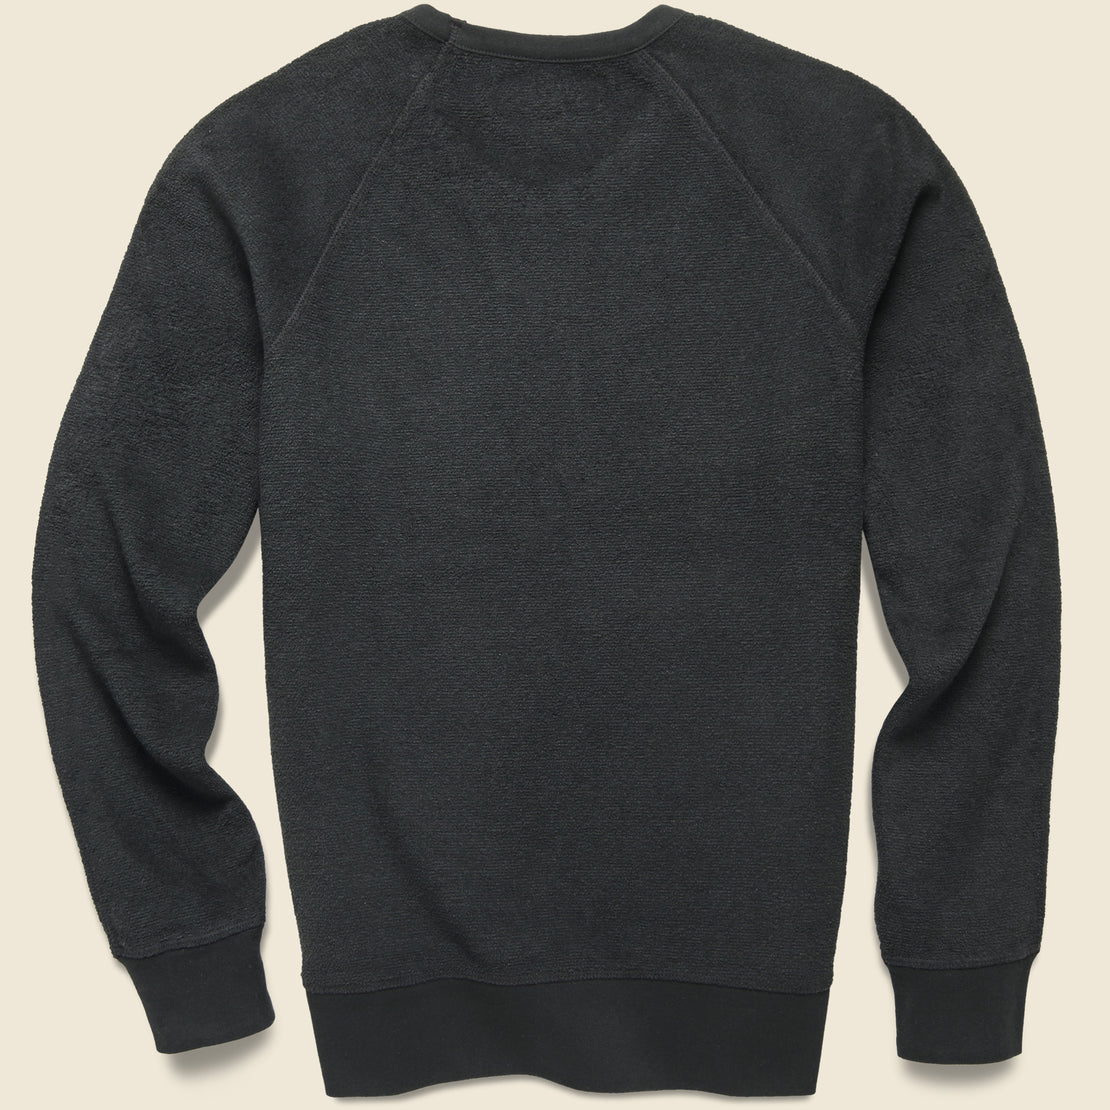 Hightide Crew - Pitch Black - Outerknown - STAG Provisions - Tops - Fleece / Sweatshirt